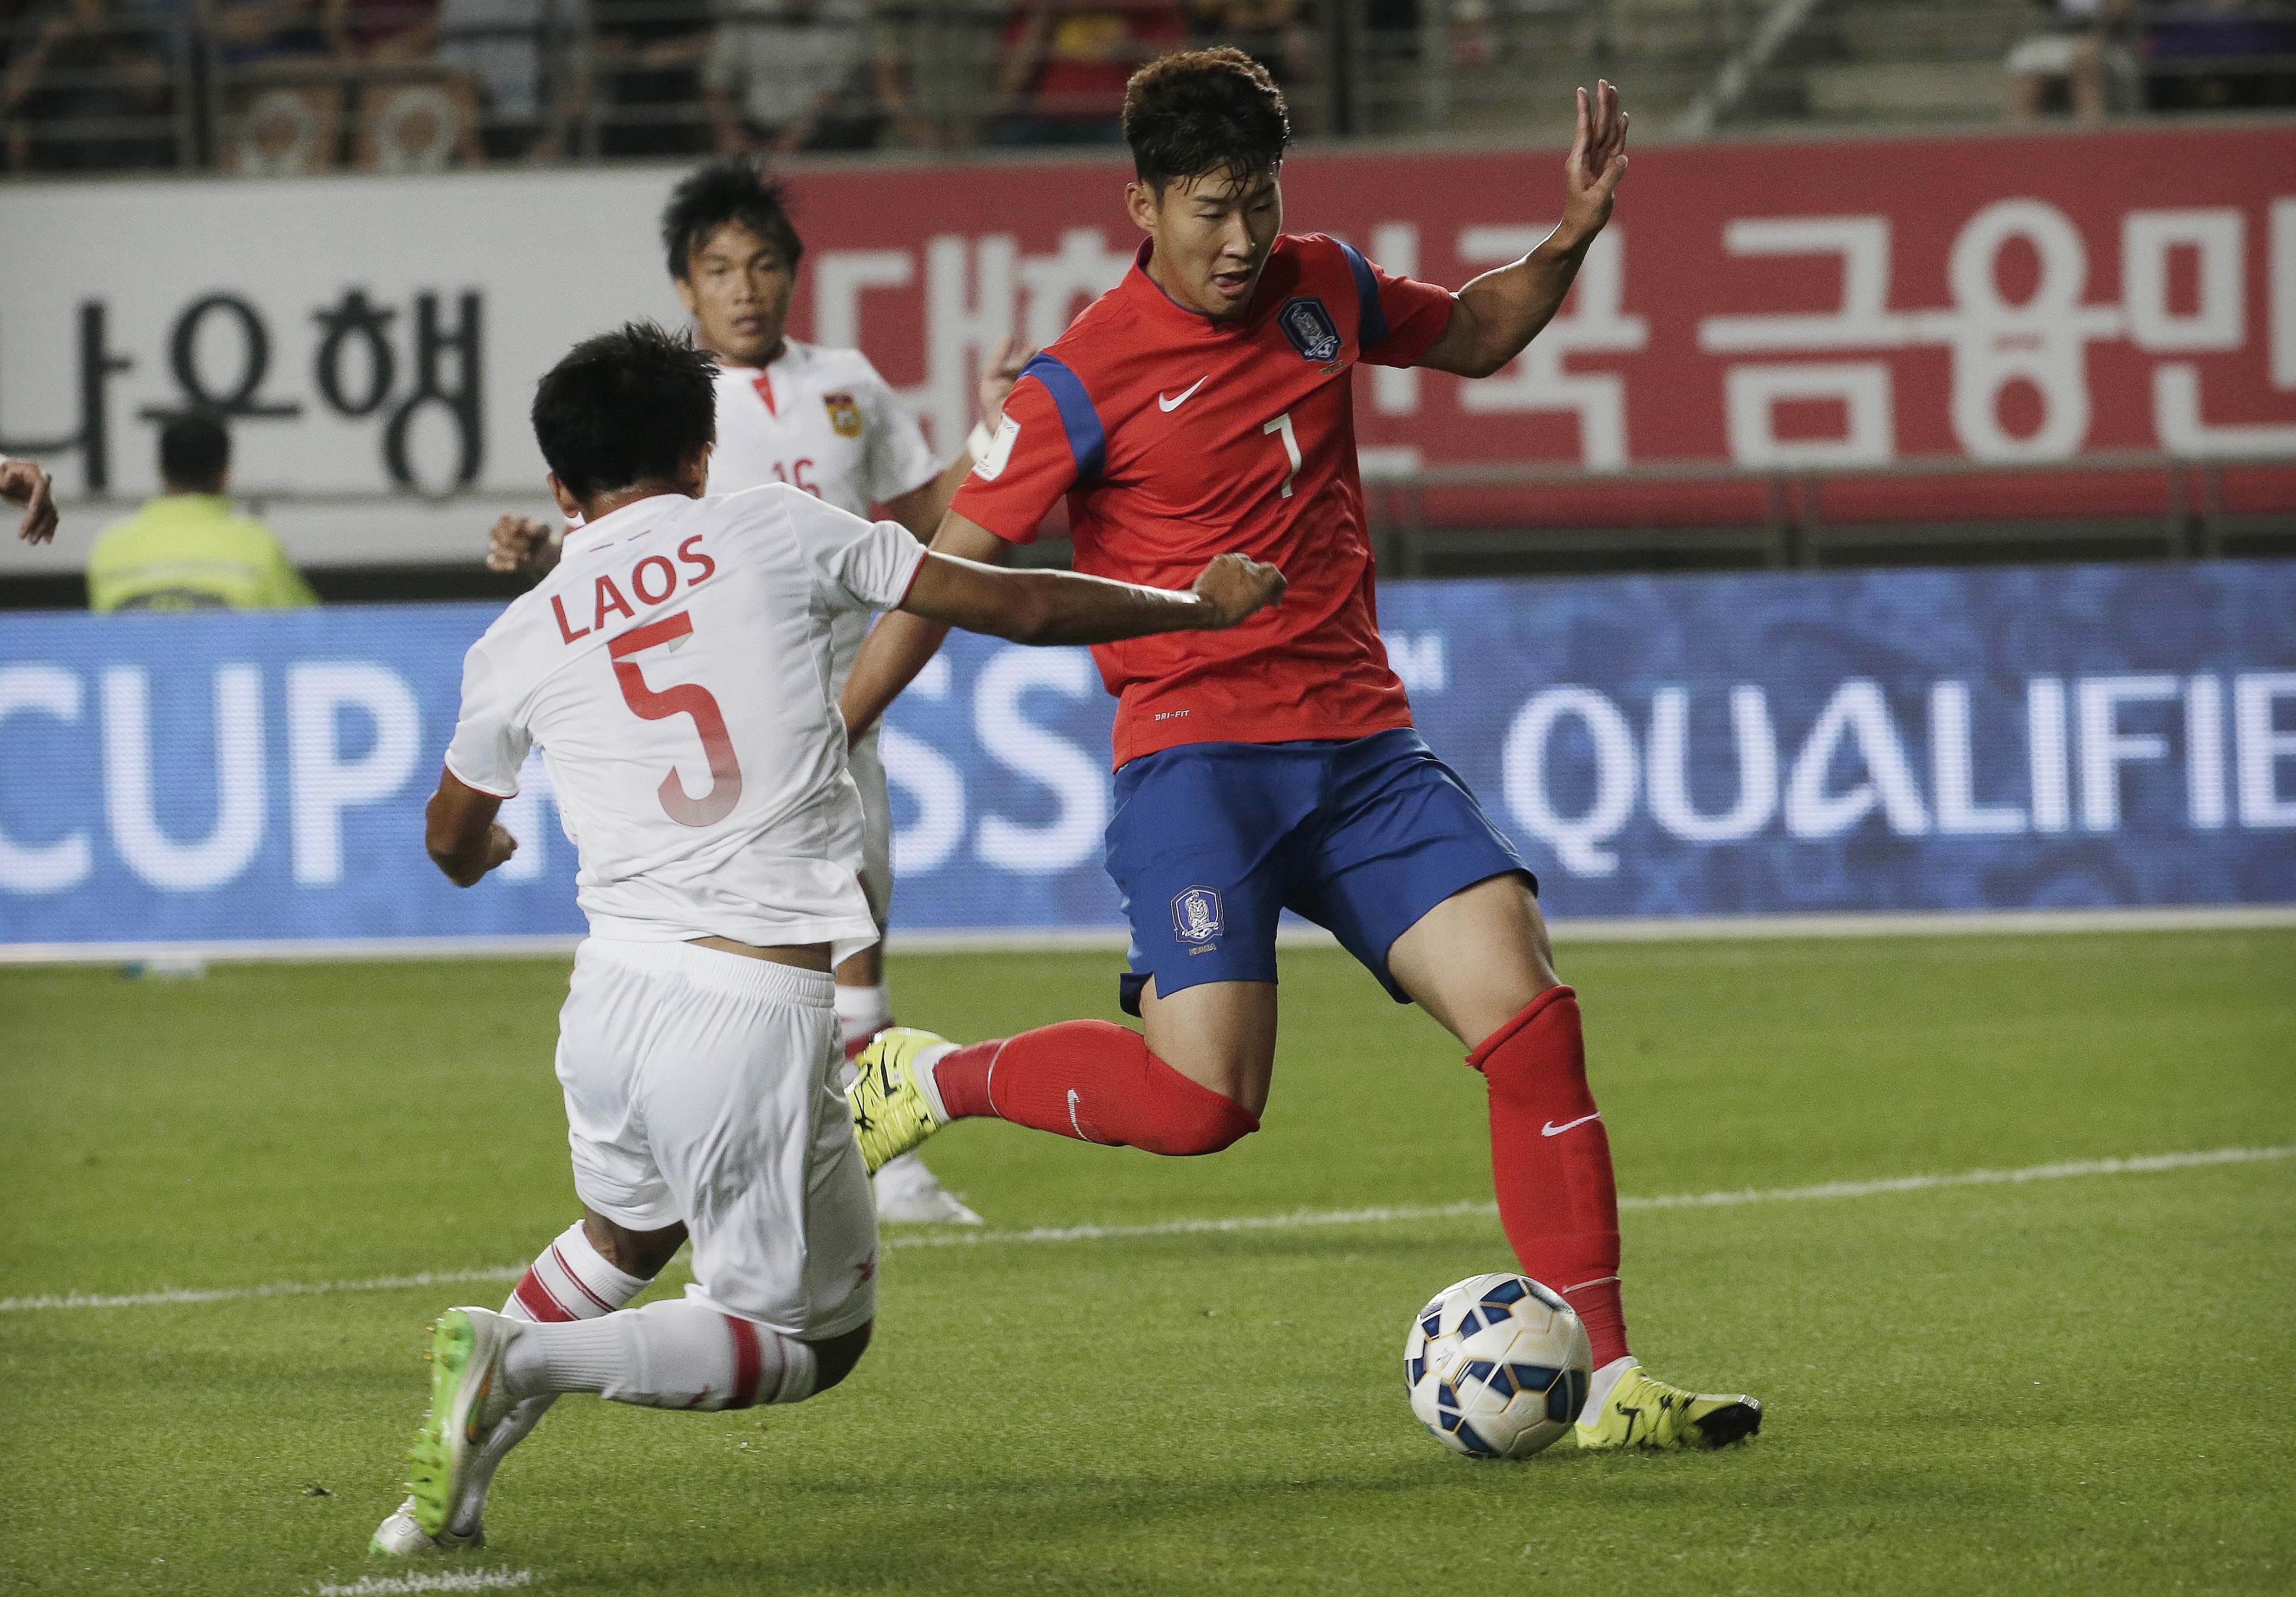 South Korea's Son Heung-min, right, scores his first goal as Laos's Pinkeo Khamla tries to block it during their Asian zone Group G qualifying soccer match for the 2018 World Cup at  Hwaseong Sports Complex Main Stadium in Hwaseong, South Korea, Thursday, Sept. 3, 2015. South Korea won 8-0.(AP Photo/Ahn Young-joon)